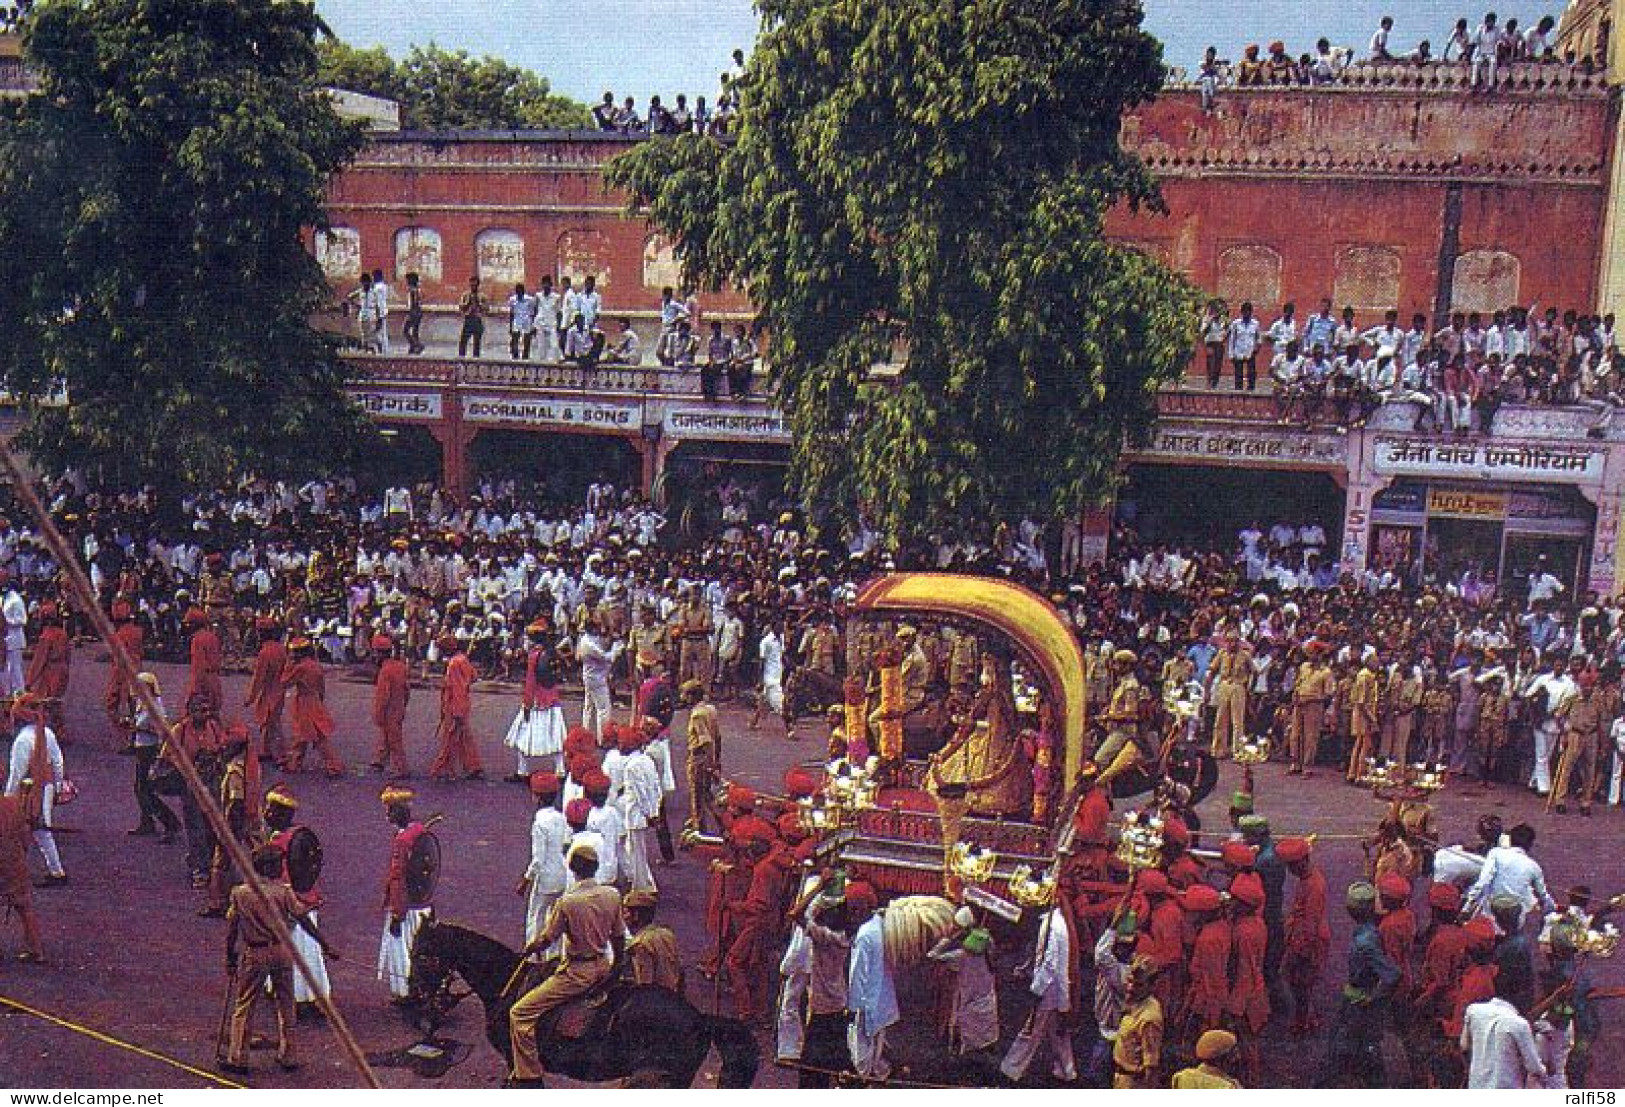 1 AK Indien * Image Of Goddess Parvati (Lord Shiva) Being Taken Out In A Procession During The Teej Festival At Jaipur * - India